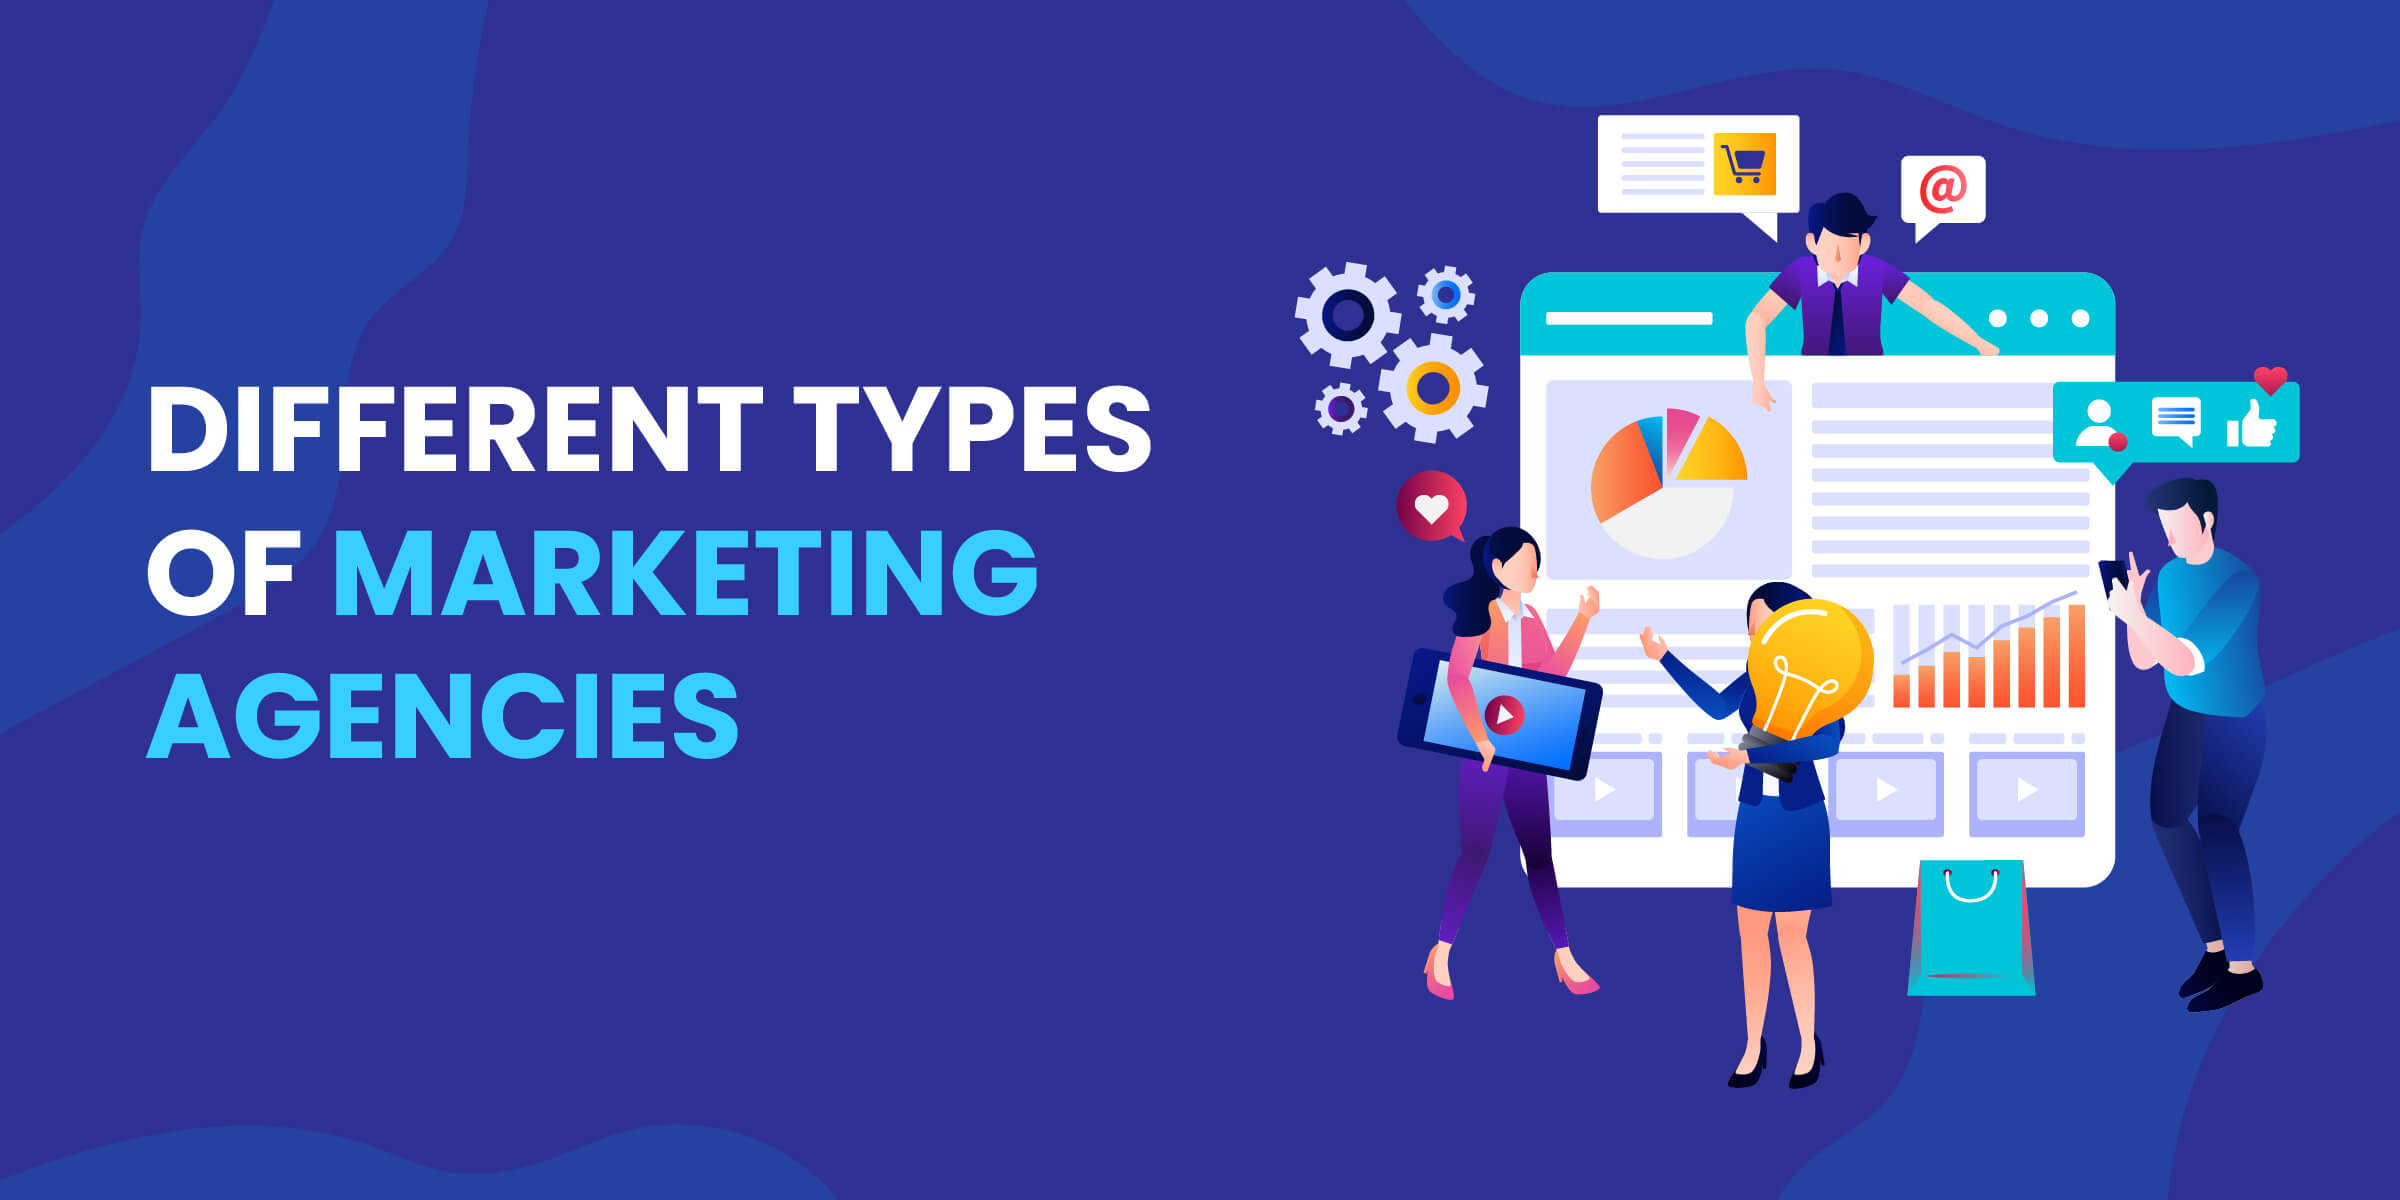 Different Types of Marketing Agencies